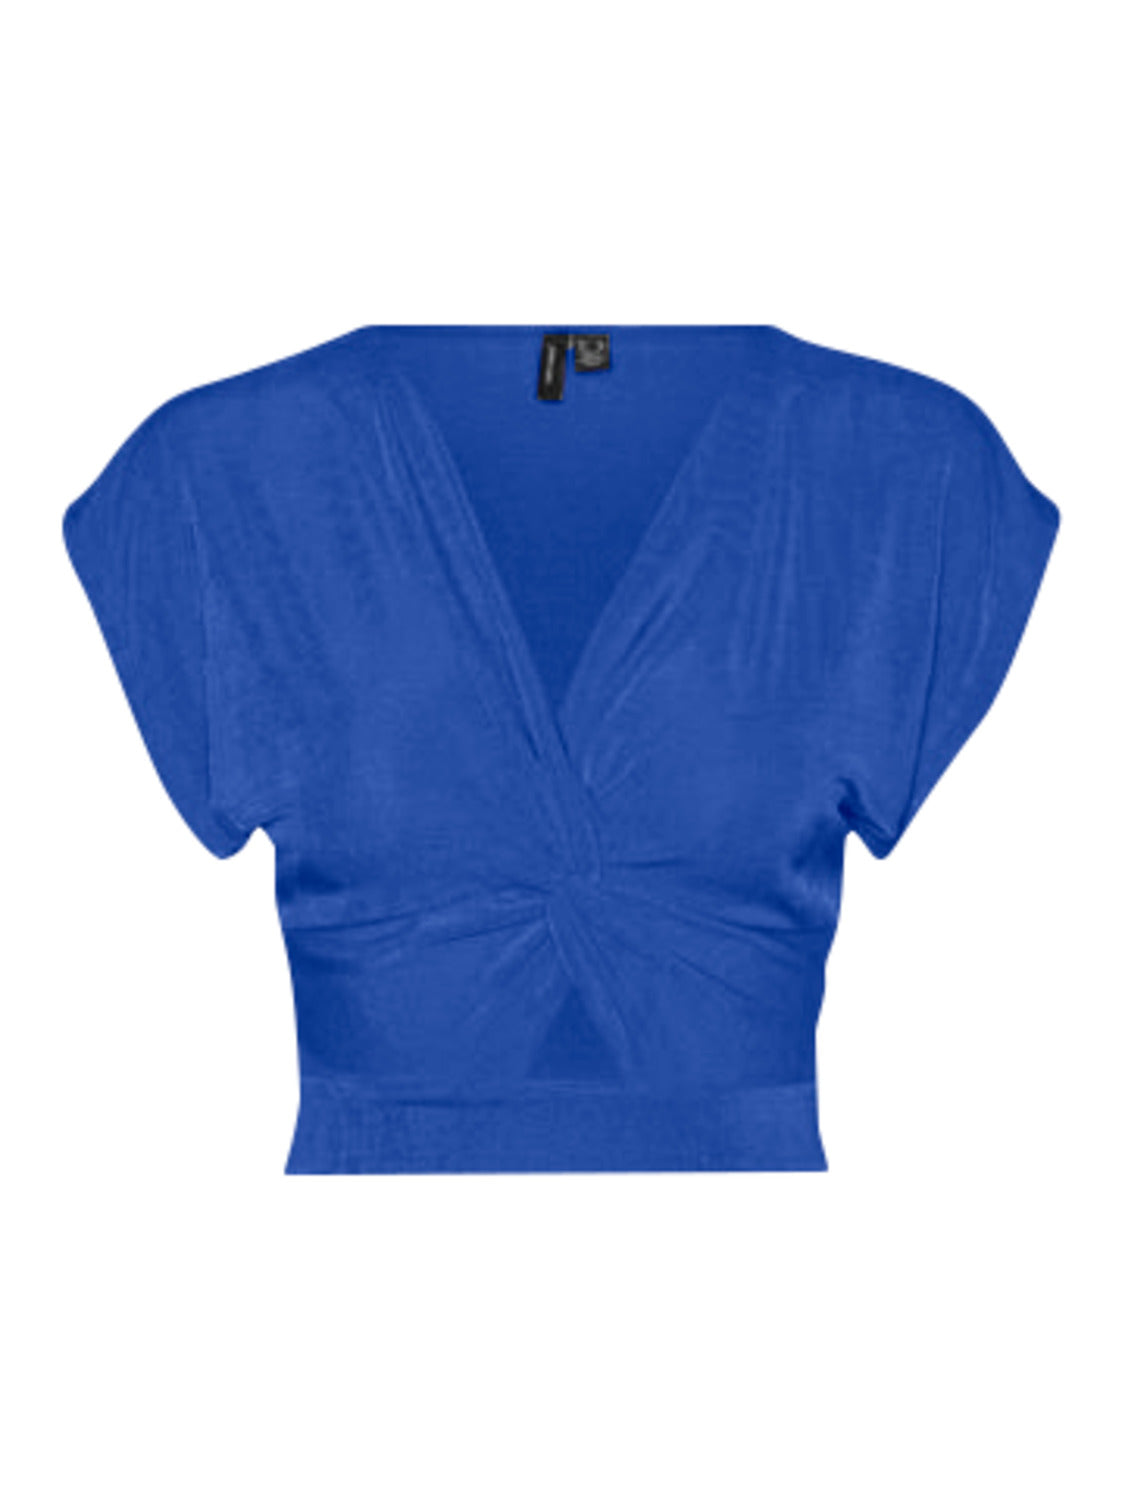 VMBLANKY T-Shirts & Tops - Dazzling Blue